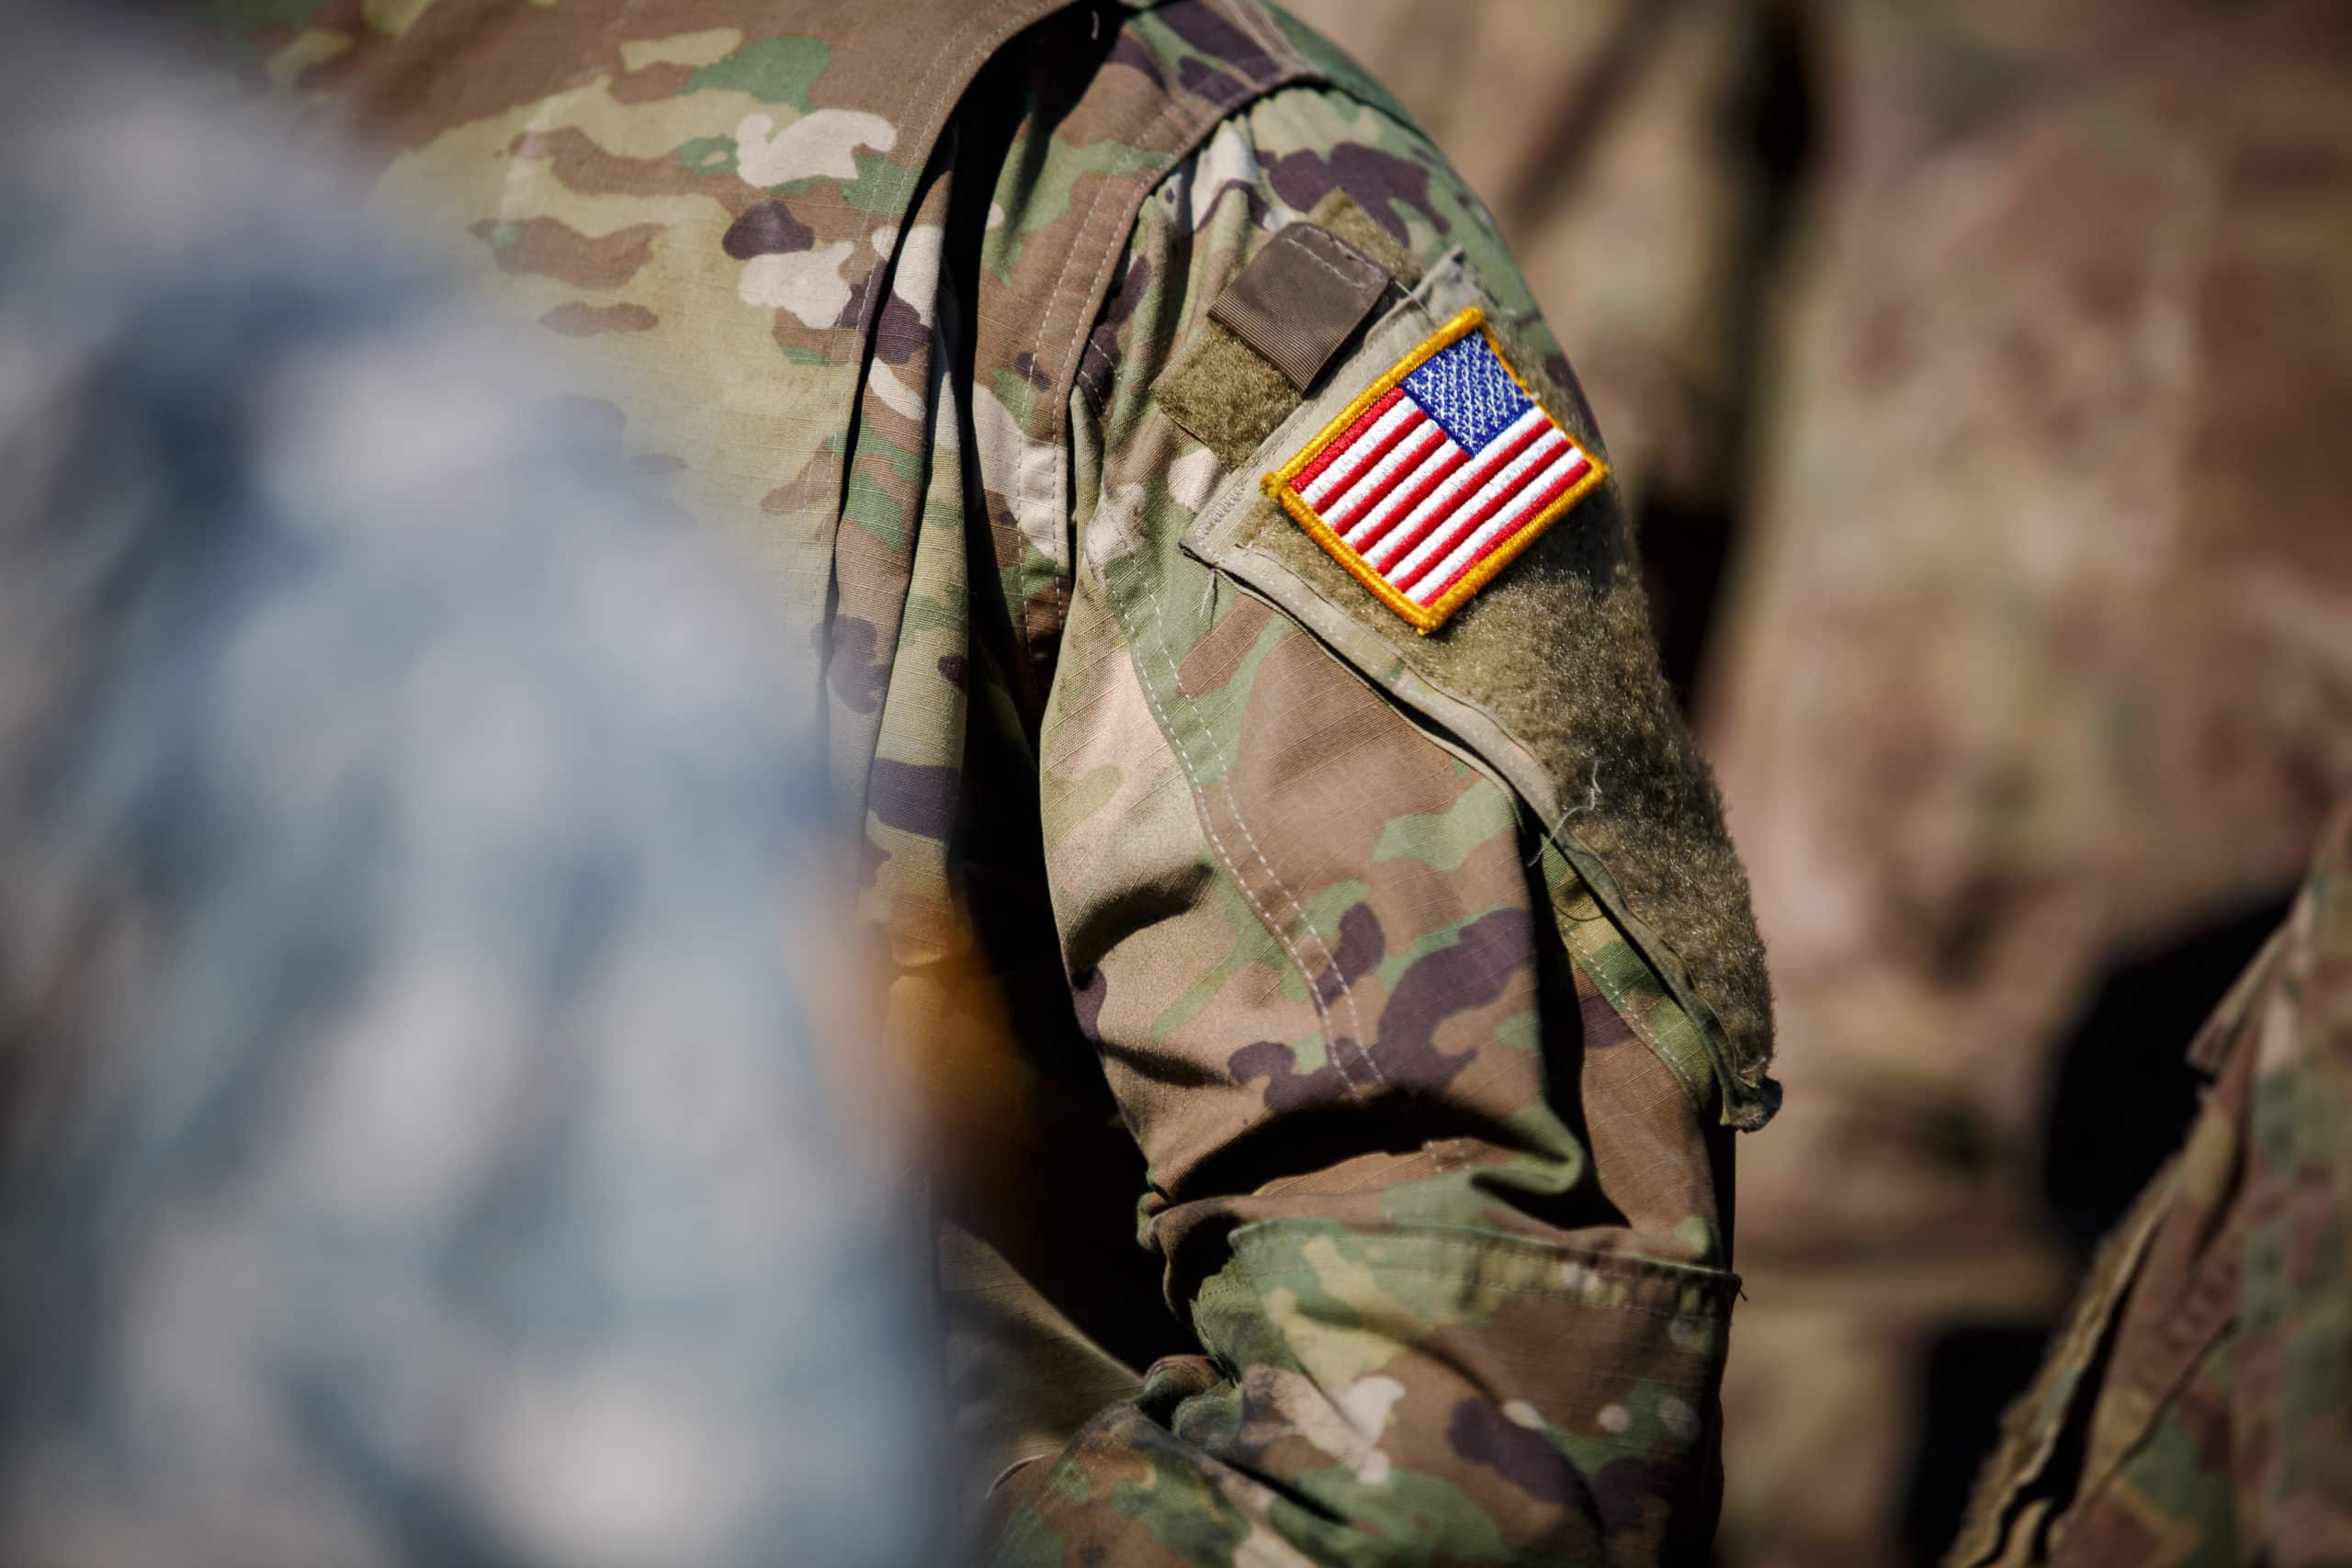 USA flag and US Army patch on solder's uniform